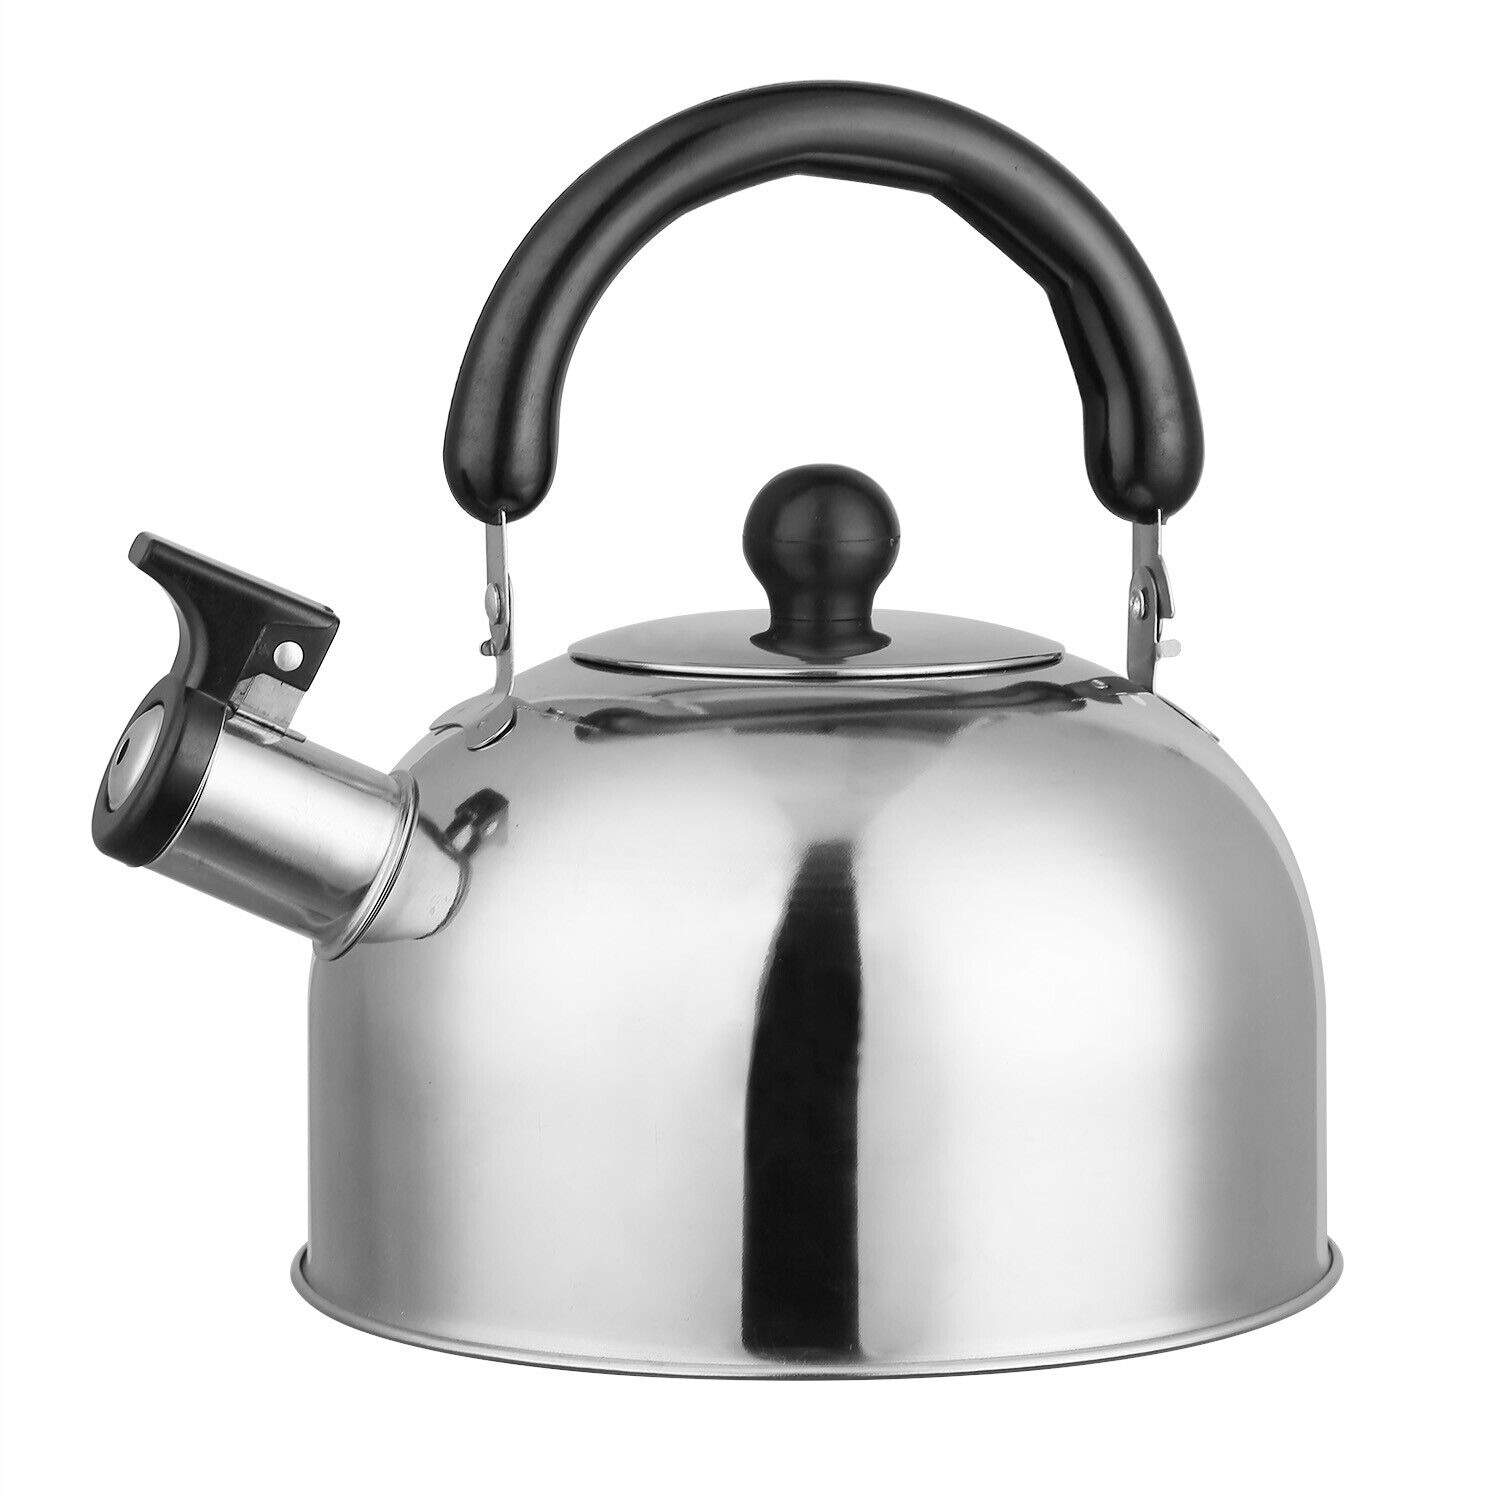 https://ak1.ostkcdn.com/images/products/is/images/direct/5298d1b6a148f0968cb71e56ba25f27d3b4c0fdc/2L-Stainless-Steel-Tea-Kettle-for-Stovetop%2C-Induction%2C-Gas.jpg